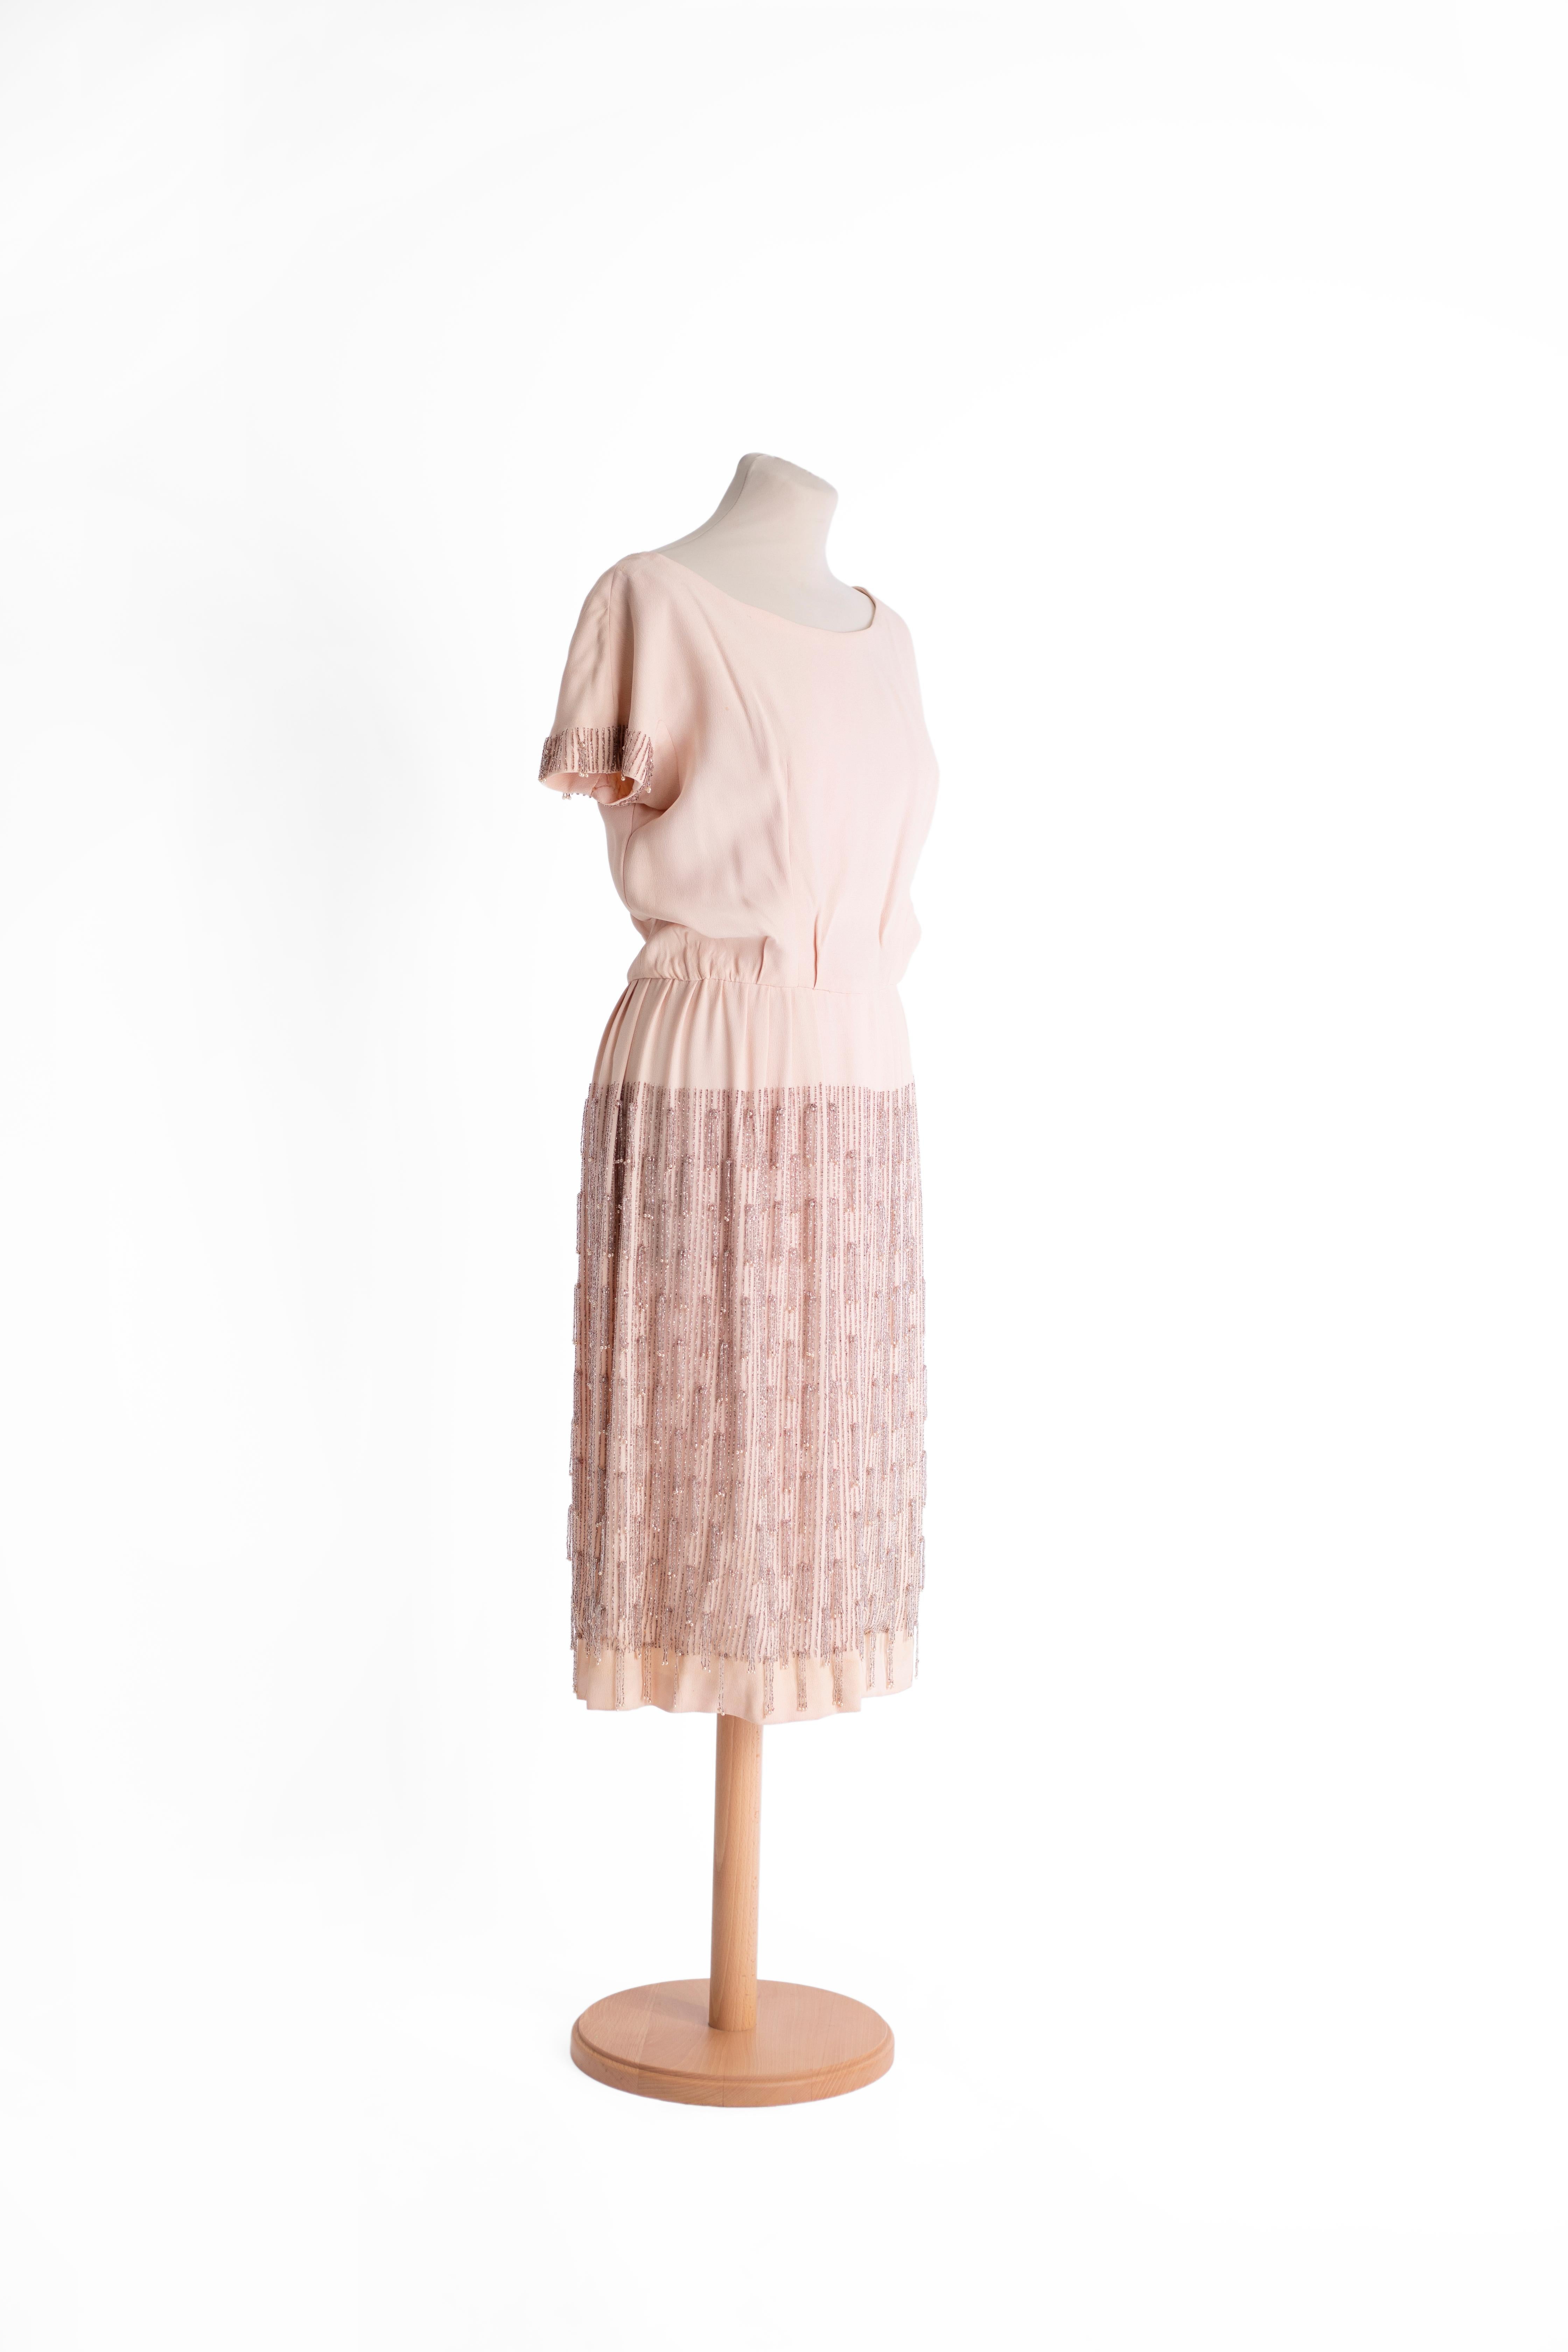 1960s Bernard Sagardoy light pink vintage dress with beaded skirt In Good Condition For Sale In Milano, IT